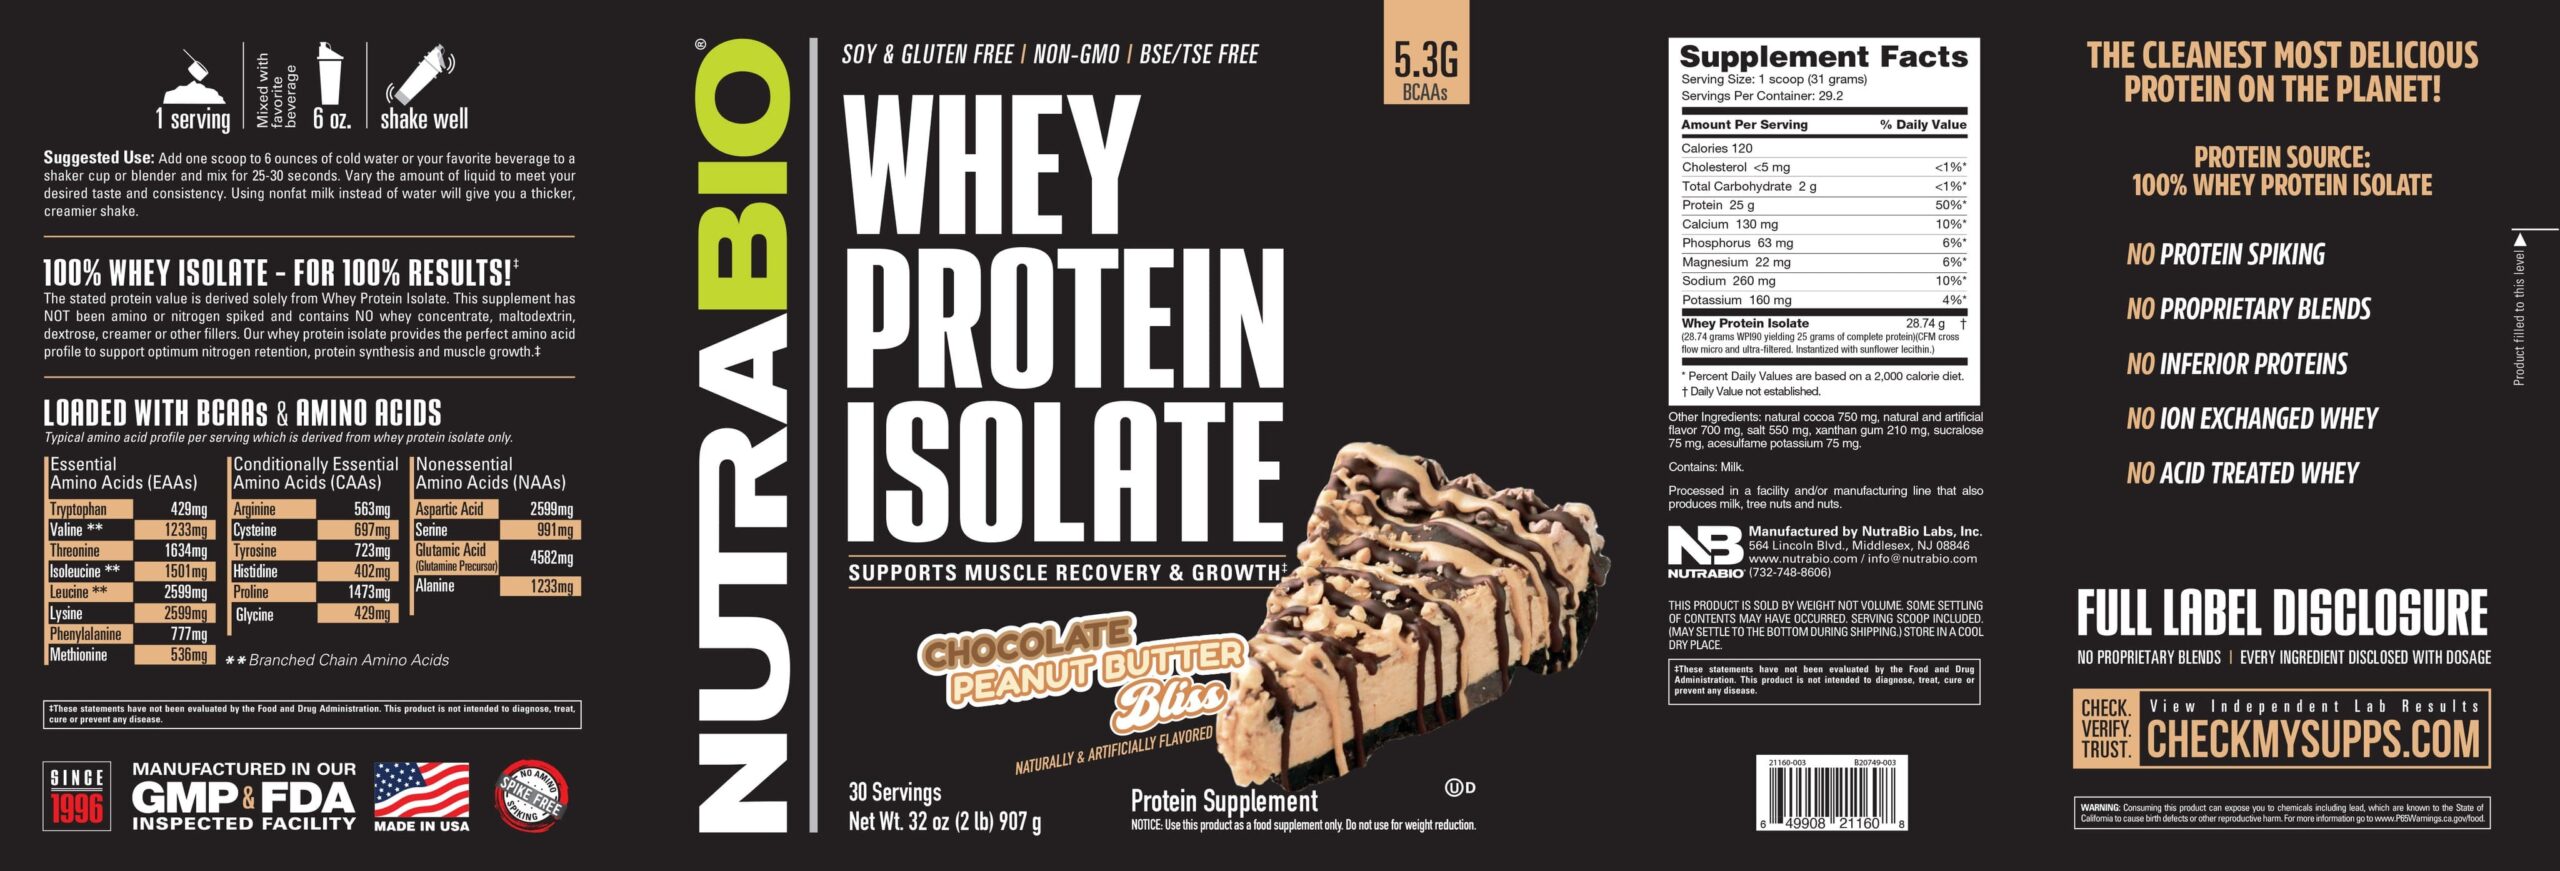 Whey-Protein-Isolate-Chocolate-Peanut-Butter-Bliss-label-en-scaled-1.jpg